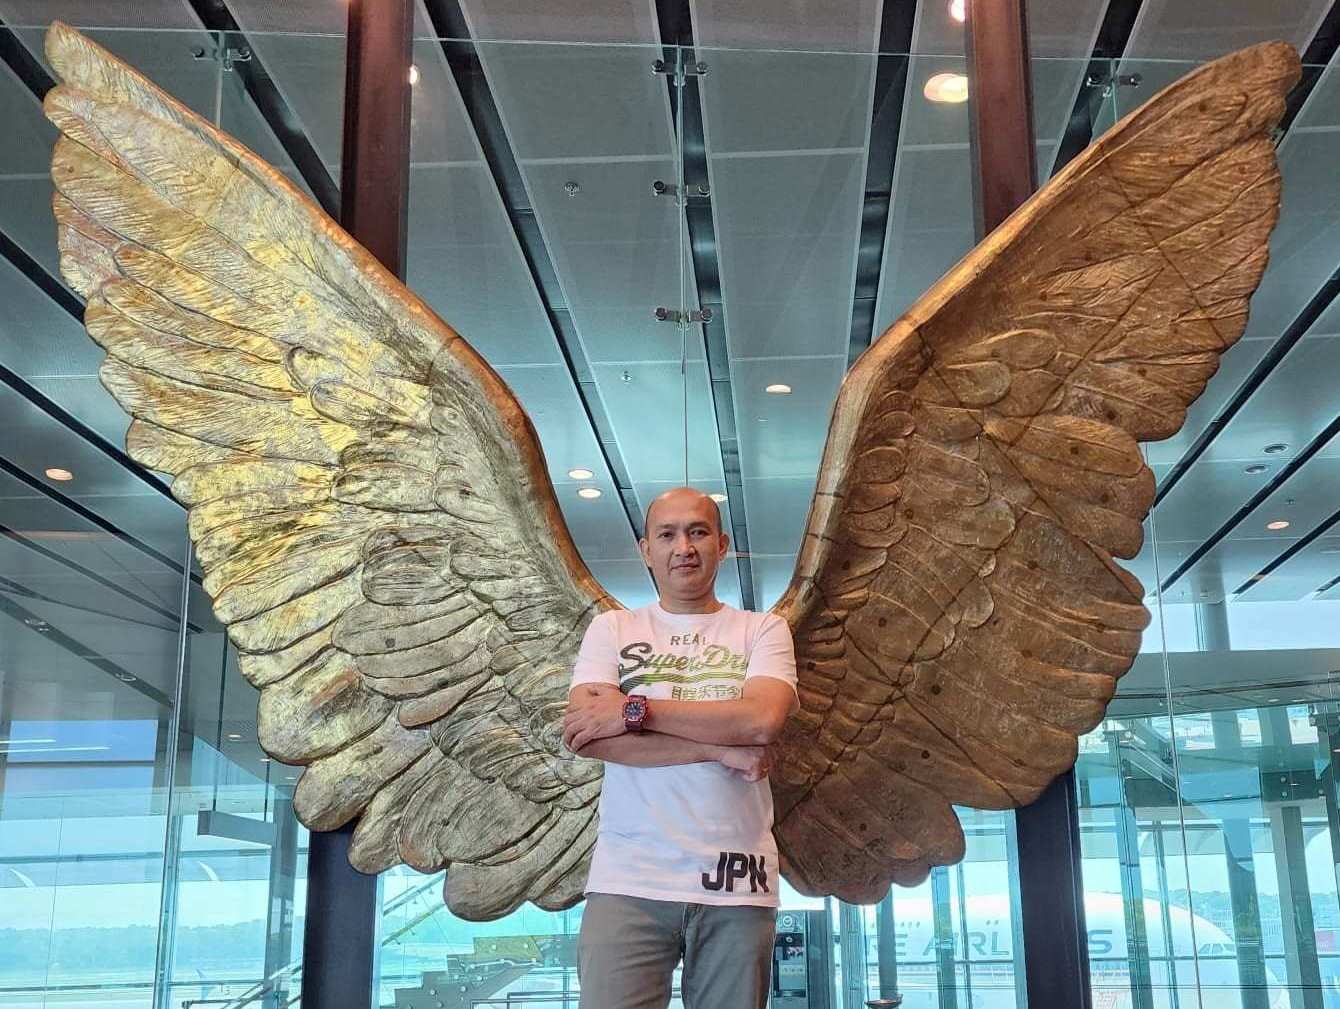 Vincent standing against gold coloured angel wings 